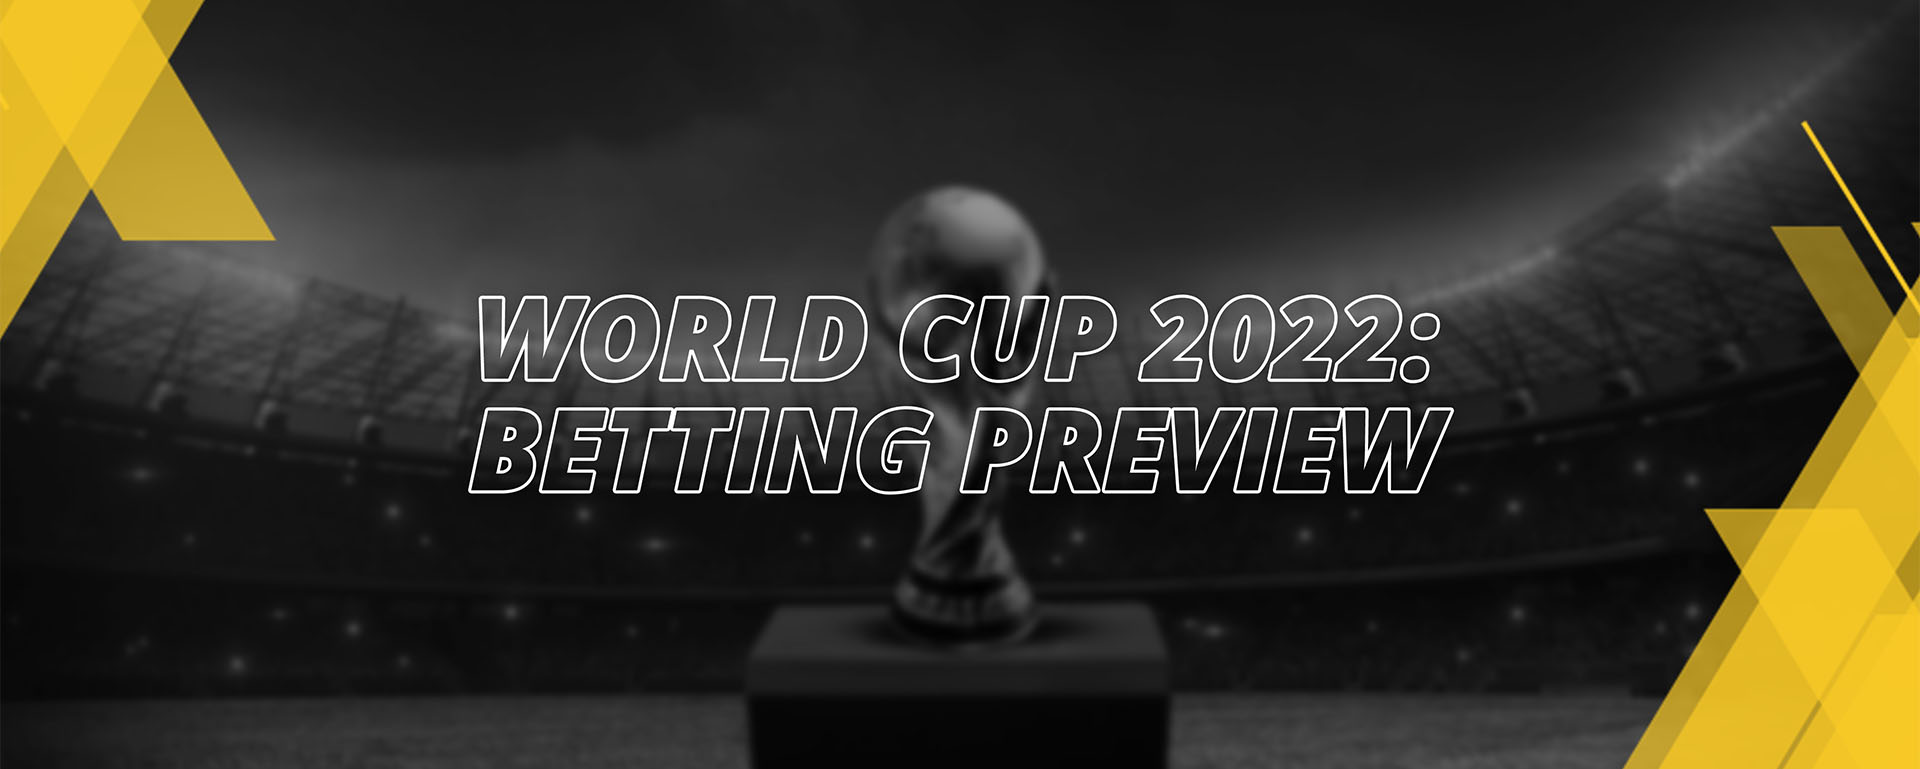 WORLD CUP 2022 BETTING